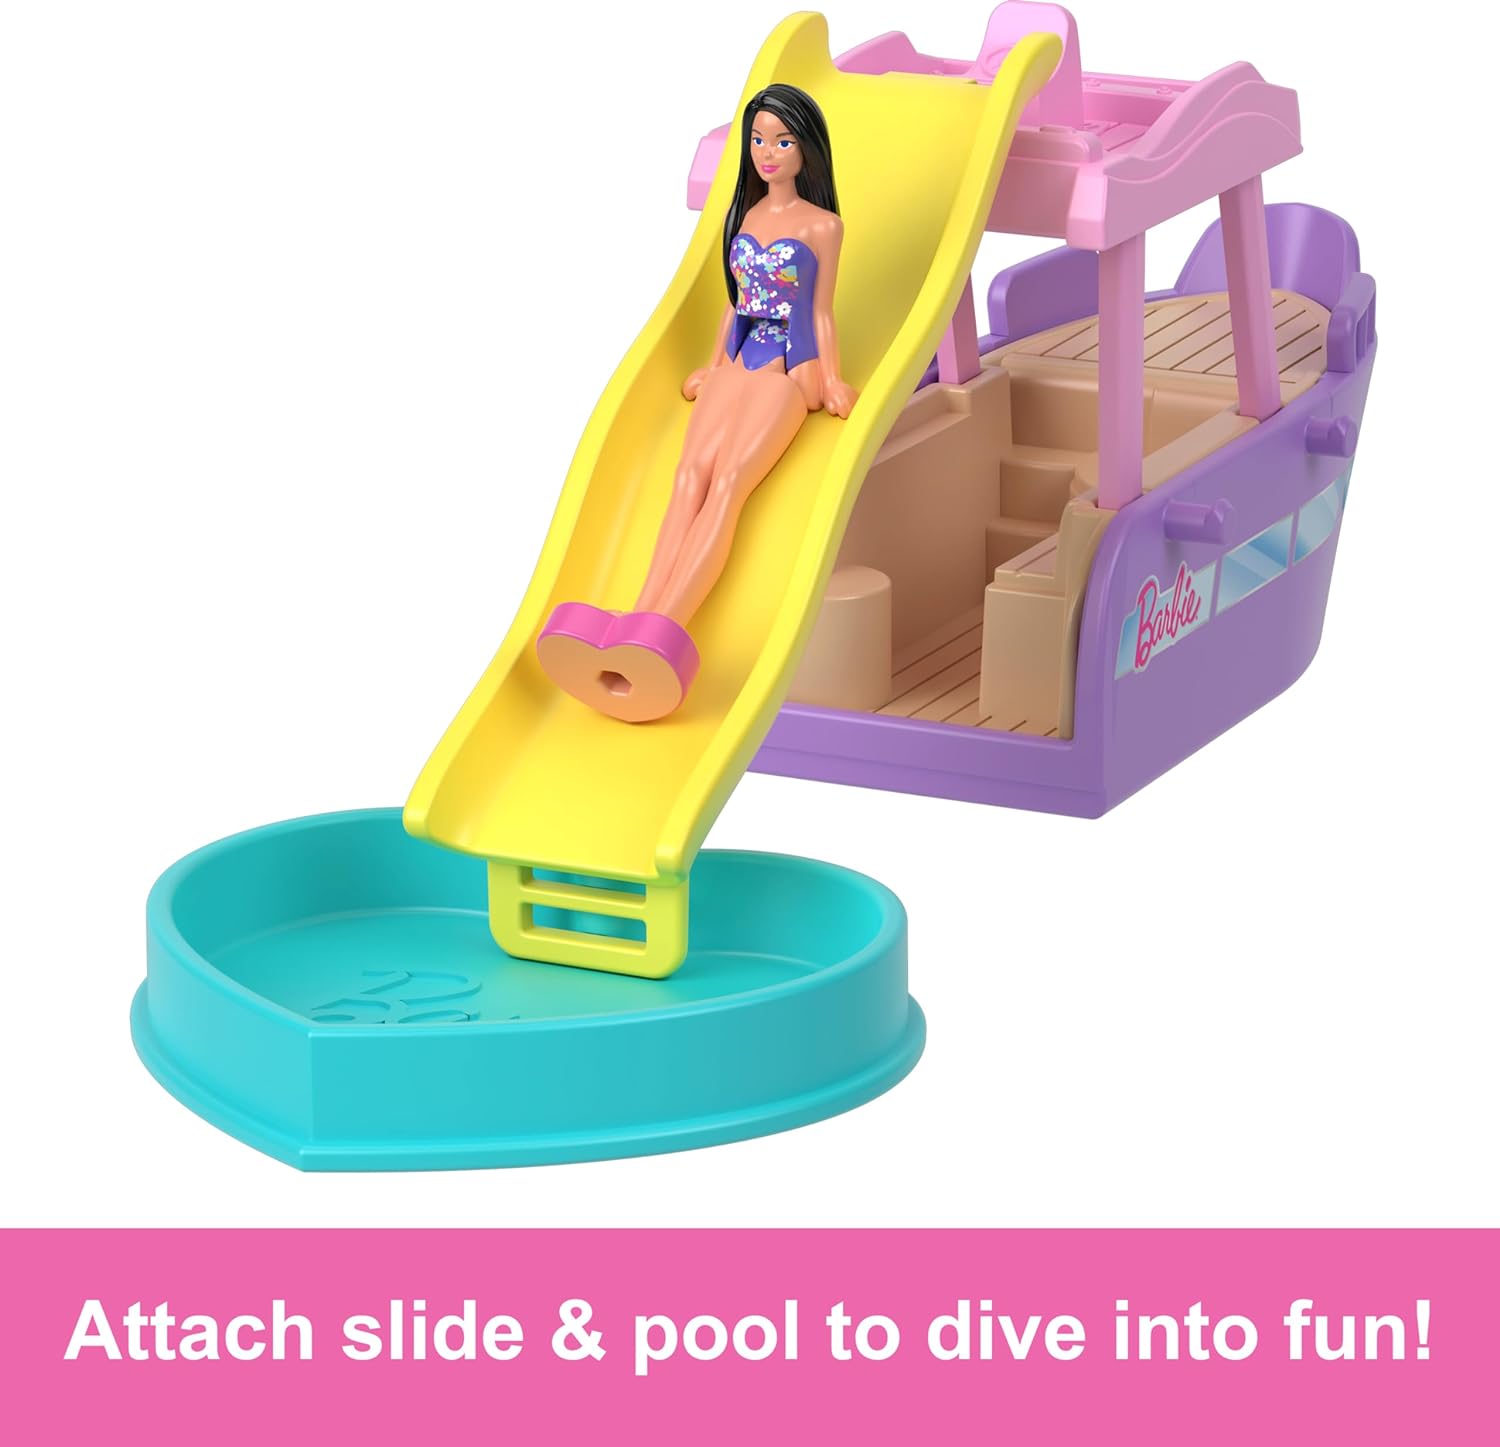 Barbie Mini BarbieLand Doll & Toy Vehicle Sets, 1.5-inch Doll & Dream Boat with Color-Change Surprise